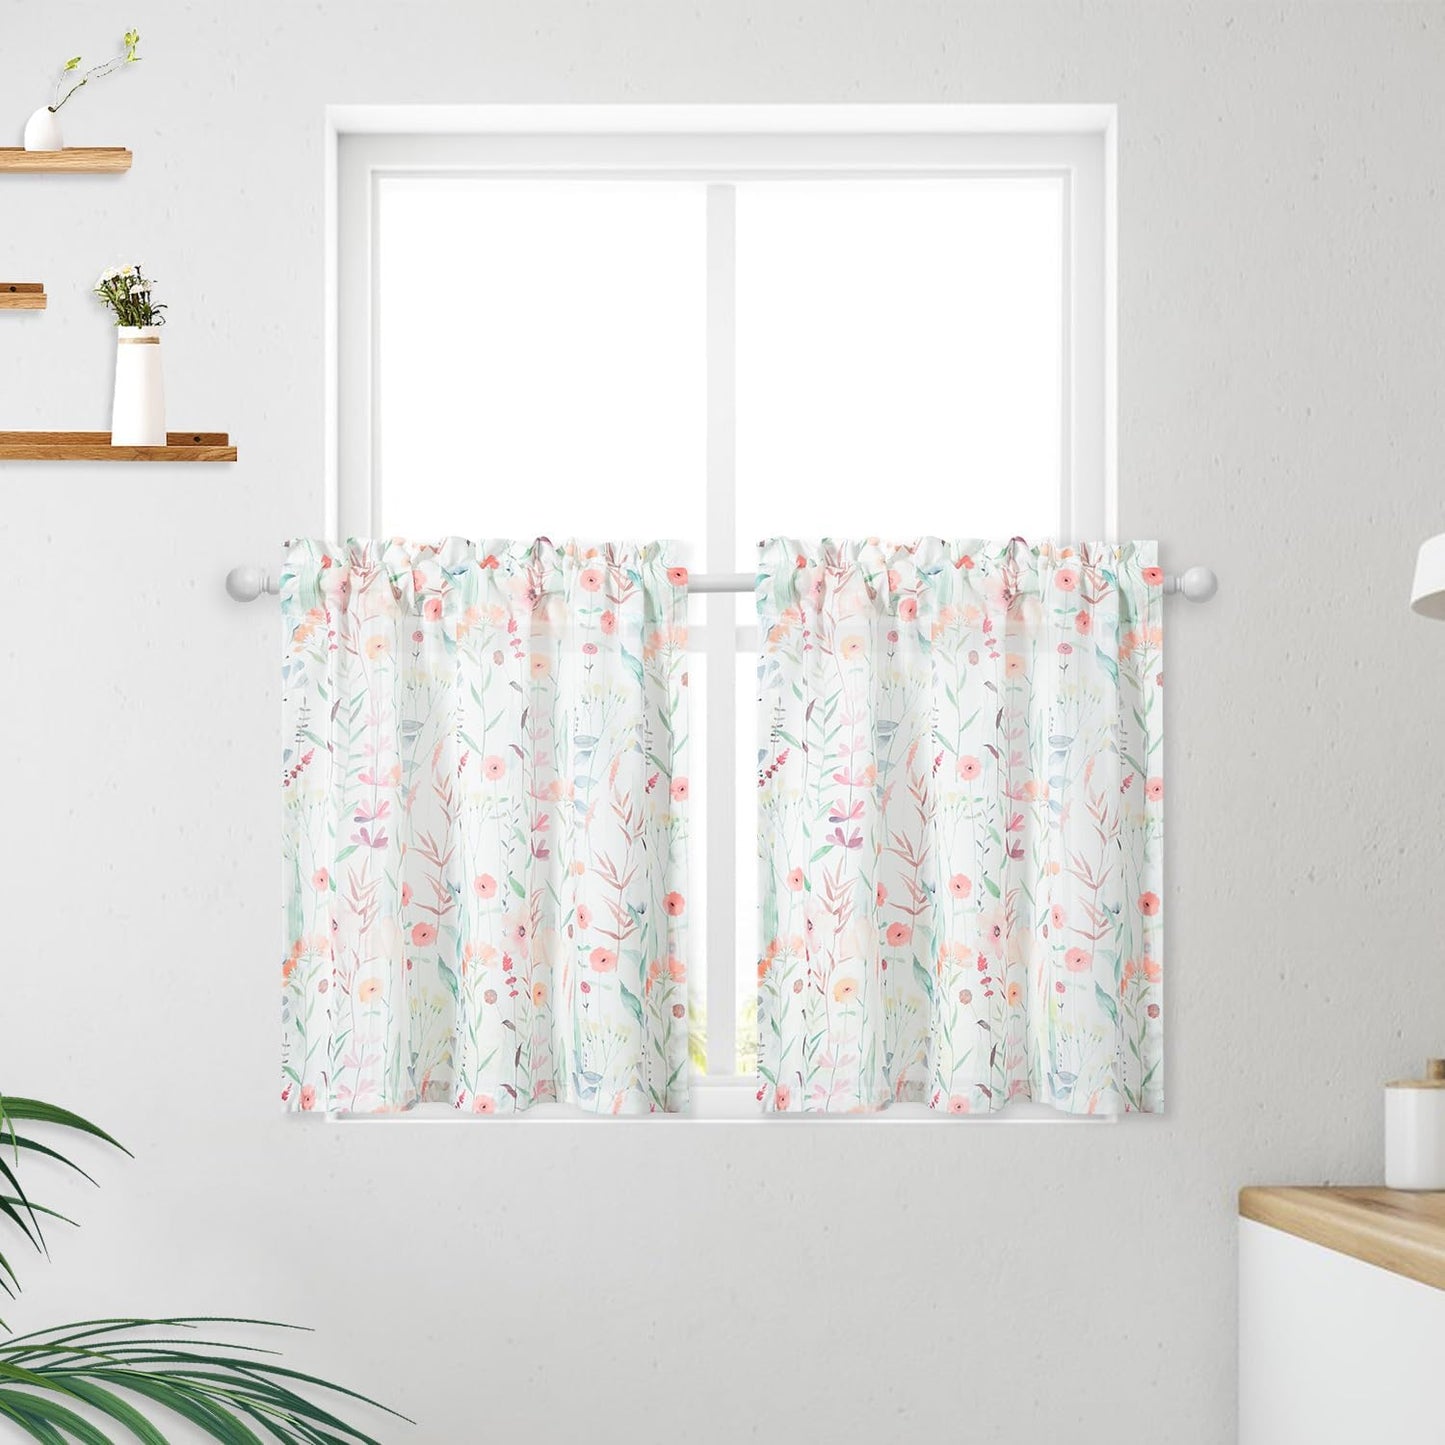 VOGOL Colorful Floral Print Tier Curtains, 2 Panels Smooth Textured Decorative Cafe Curtain, Rod Pocket Sheer Drapery for Farmhouse, W 30 X L 24  VOGOL Mn002 W30 X L24 